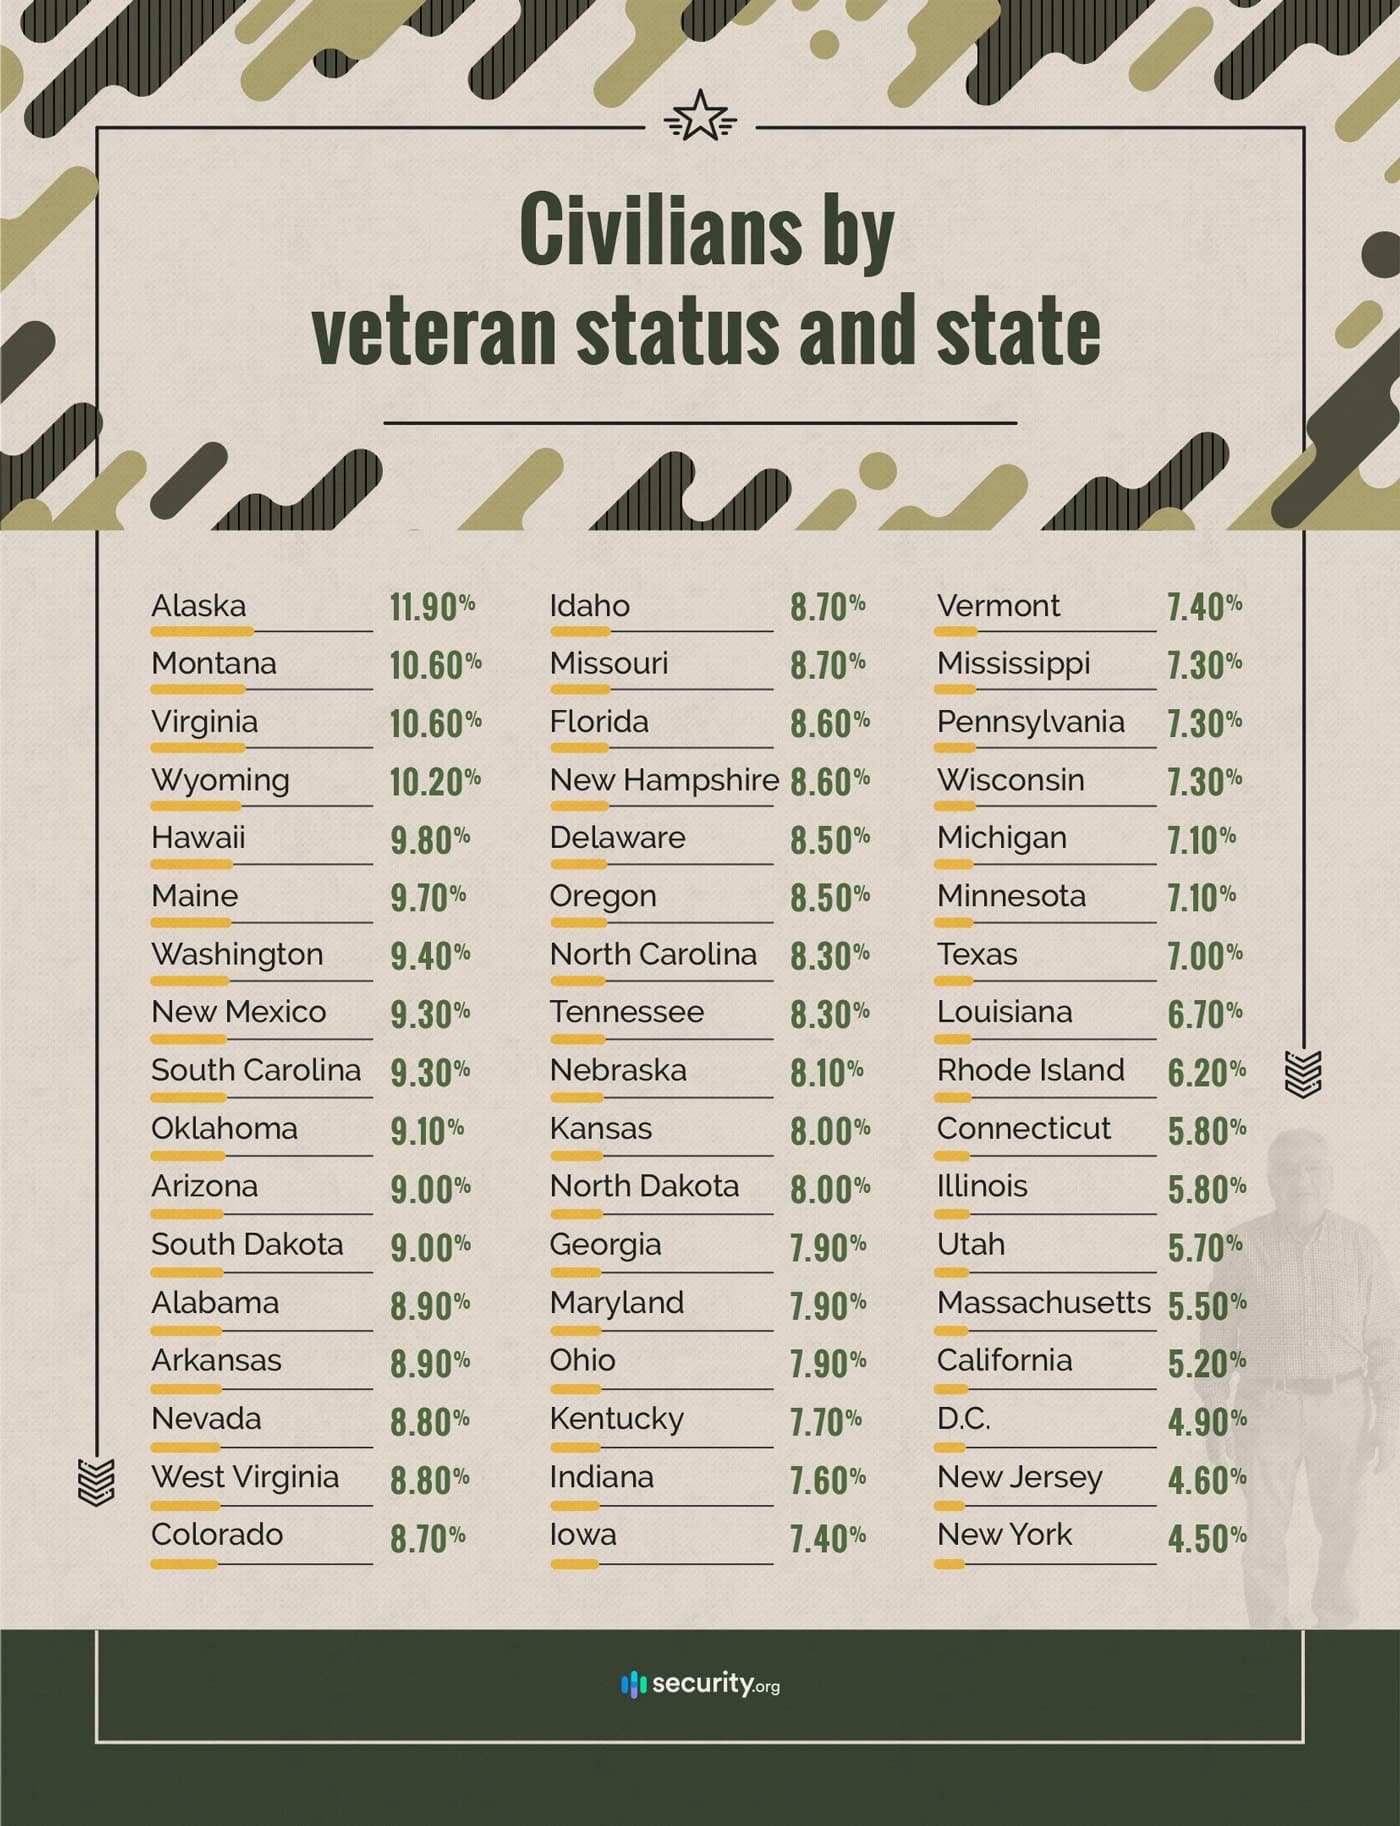 Civilians by veteran status and state